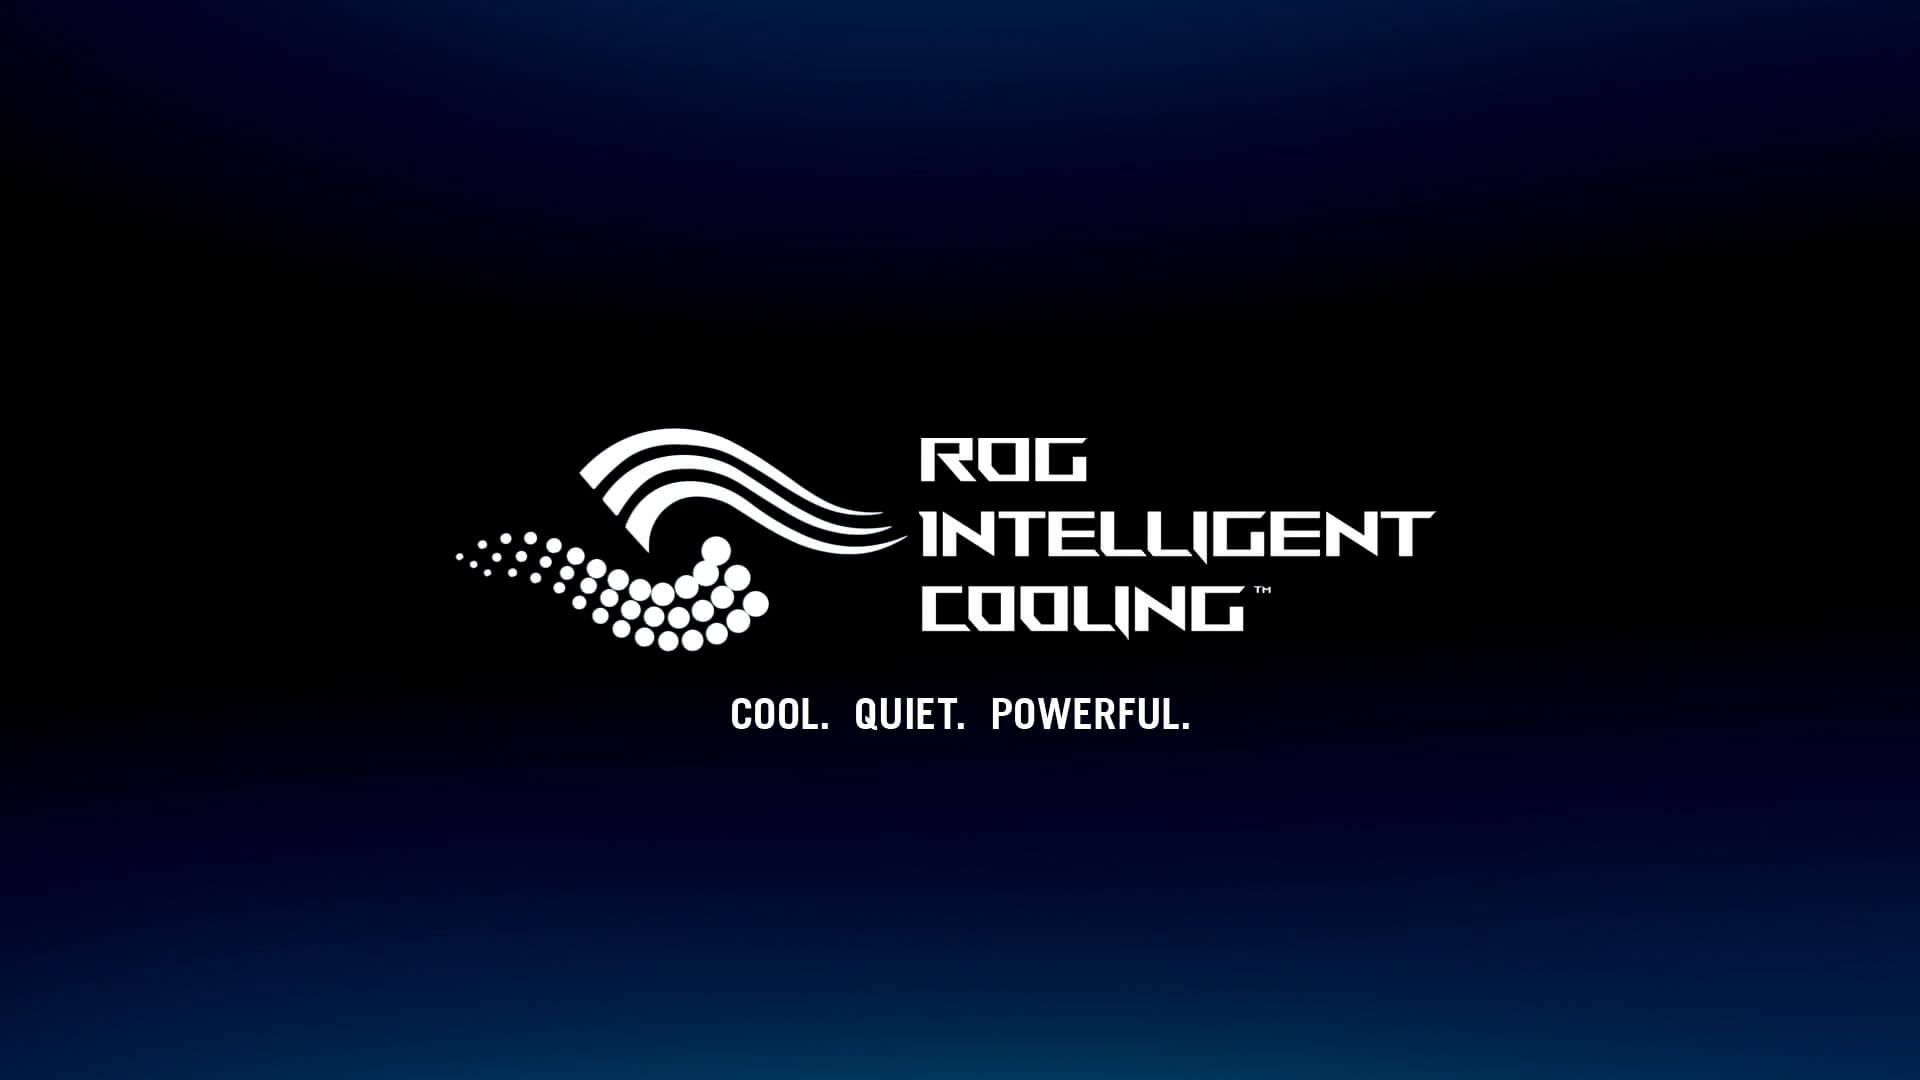 Let's boost the ROG Ally's thermal performance